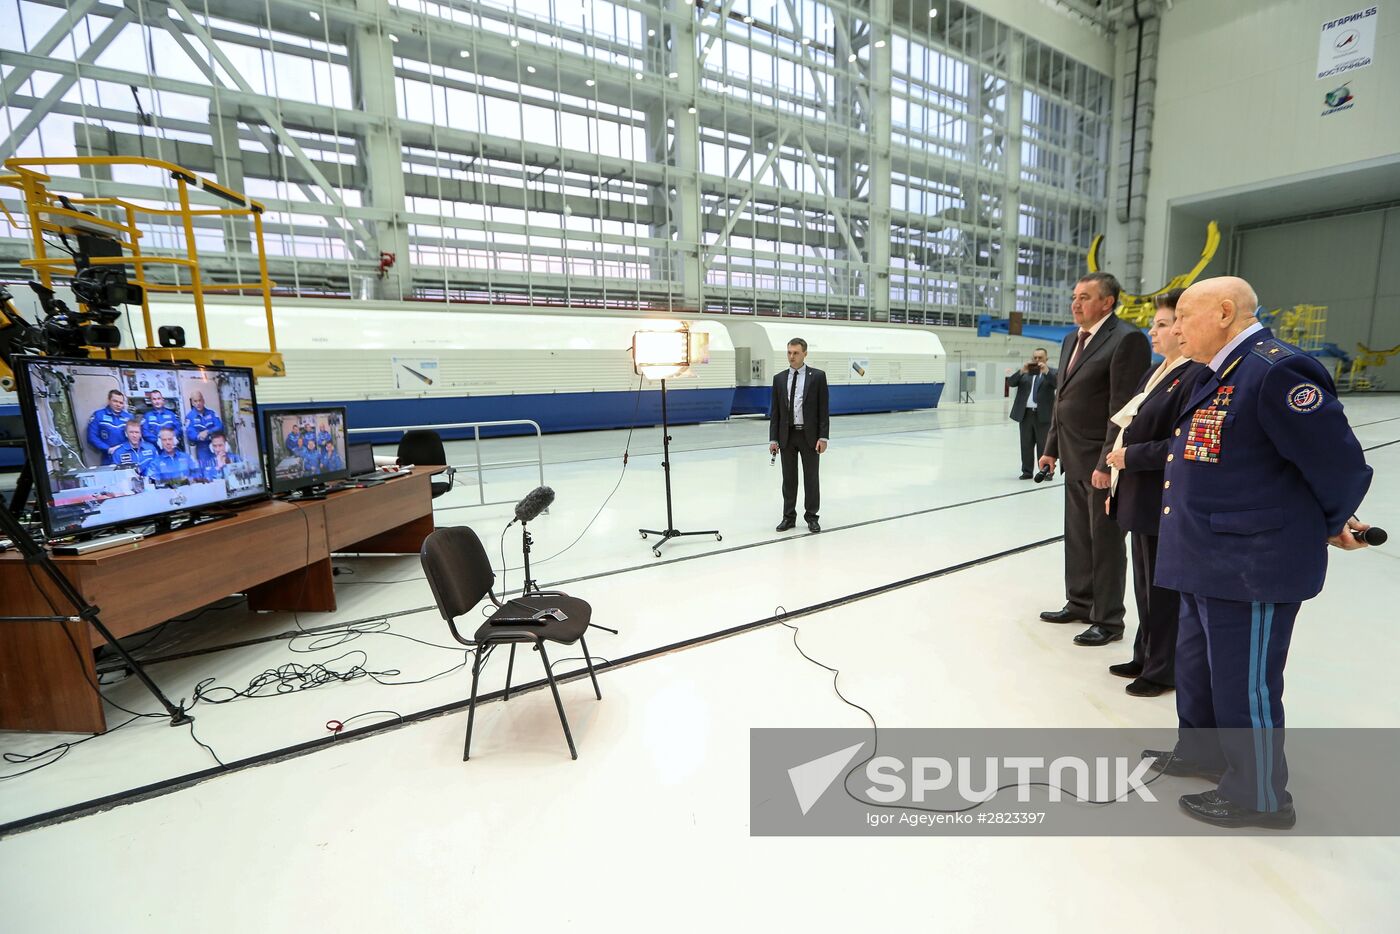 Aviation and Cosmonautics Day celebrated at Vostochny Space Center in Amur Region